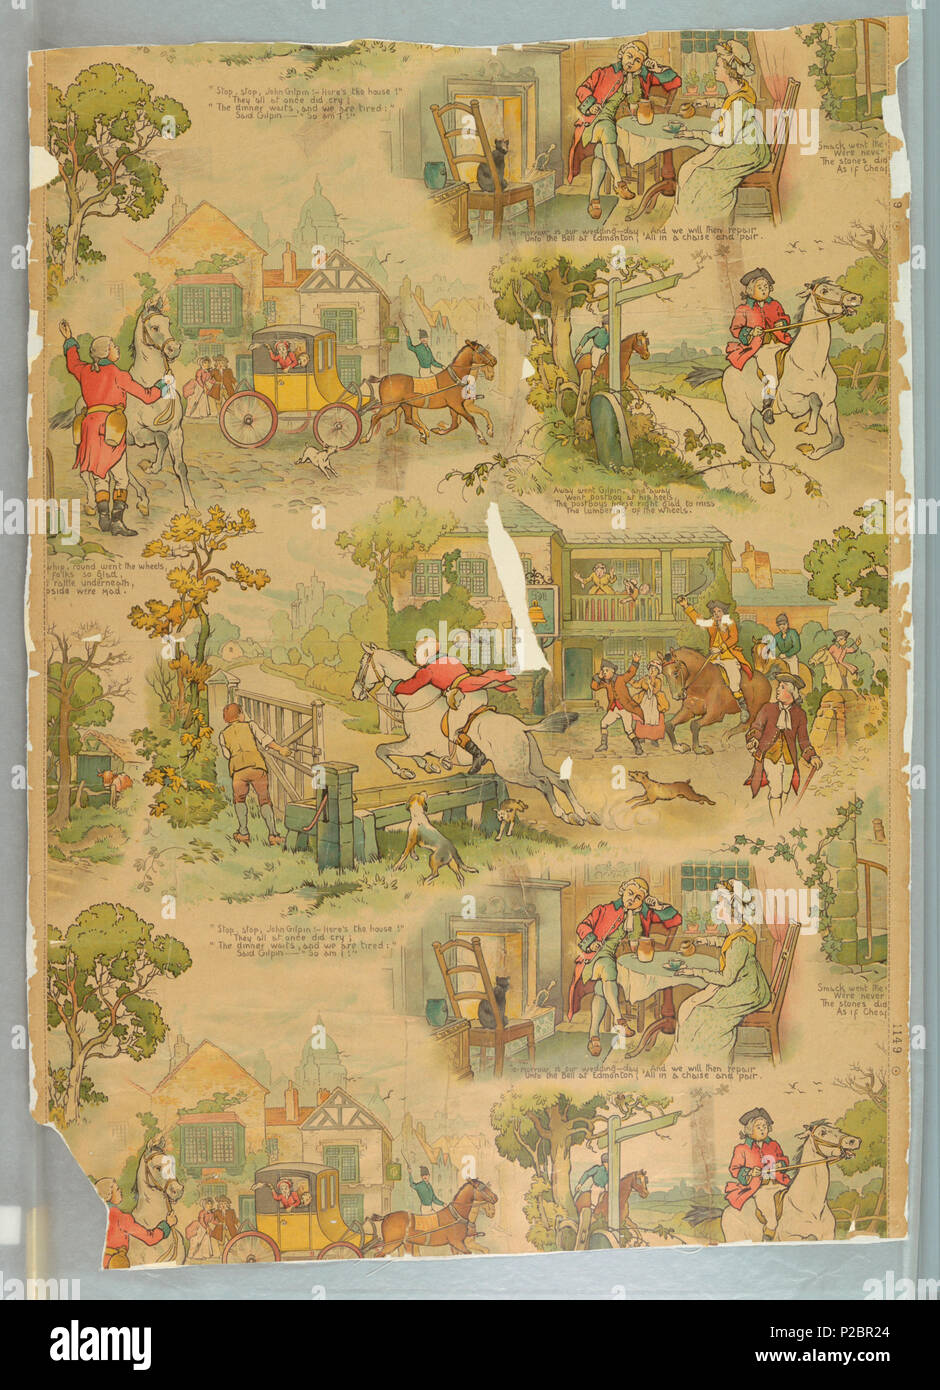 .  English: Sidewall, History of John Gilpin, 1908 .  English: Nursery or children's paper with scenes from the poem 'John Gilpin', in random arrangement with lines from the poem accompanying each medallion. Highway and tavern scenes. Printed in greens, reds, browns and yellows on glazed cream ground. Being printed with intaglio rollers in oil colors allowed this paper to be wiped clean. . 1908 292 Sidewall, History of John Gilpin, 1908 (CH 18401559) Stock Photo